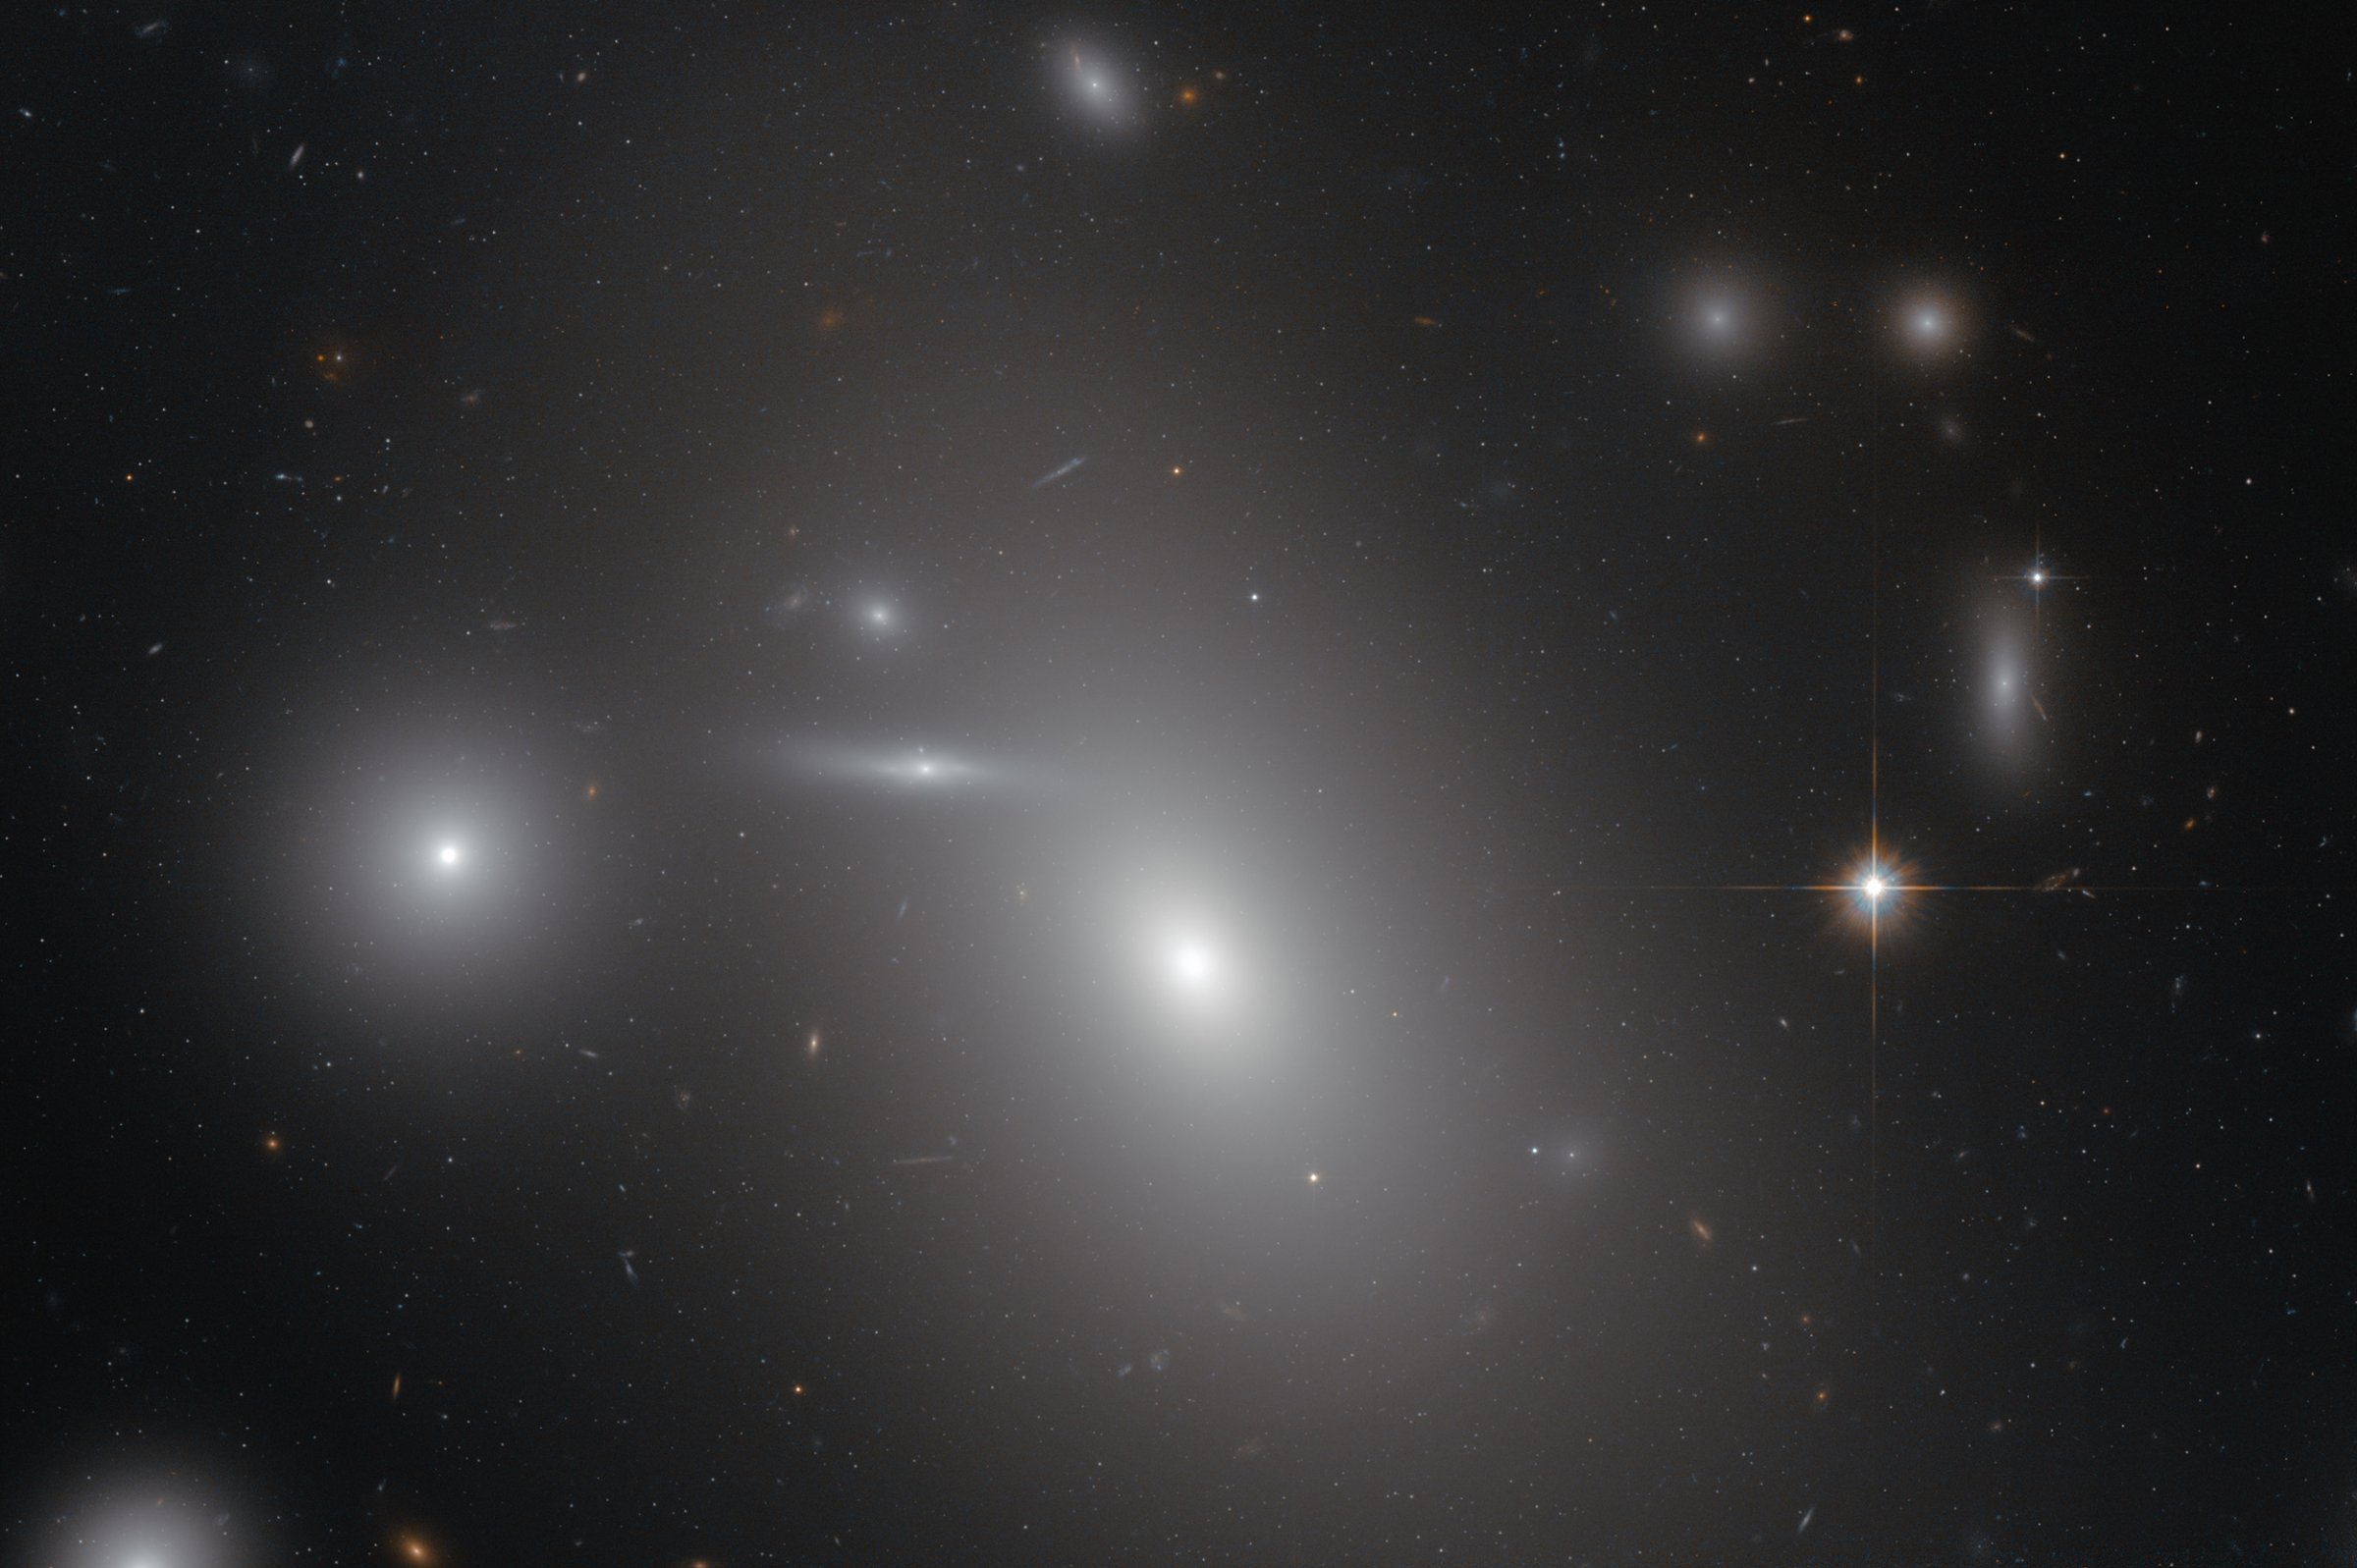 The elliptical galaxy NGC 4889 in front of hundreds of background galaxies, and deeply embedded within the Coma galaxy cluster. Hidden from human eyes, is a gigantic supermassive black hole at the centre of the galaxy.